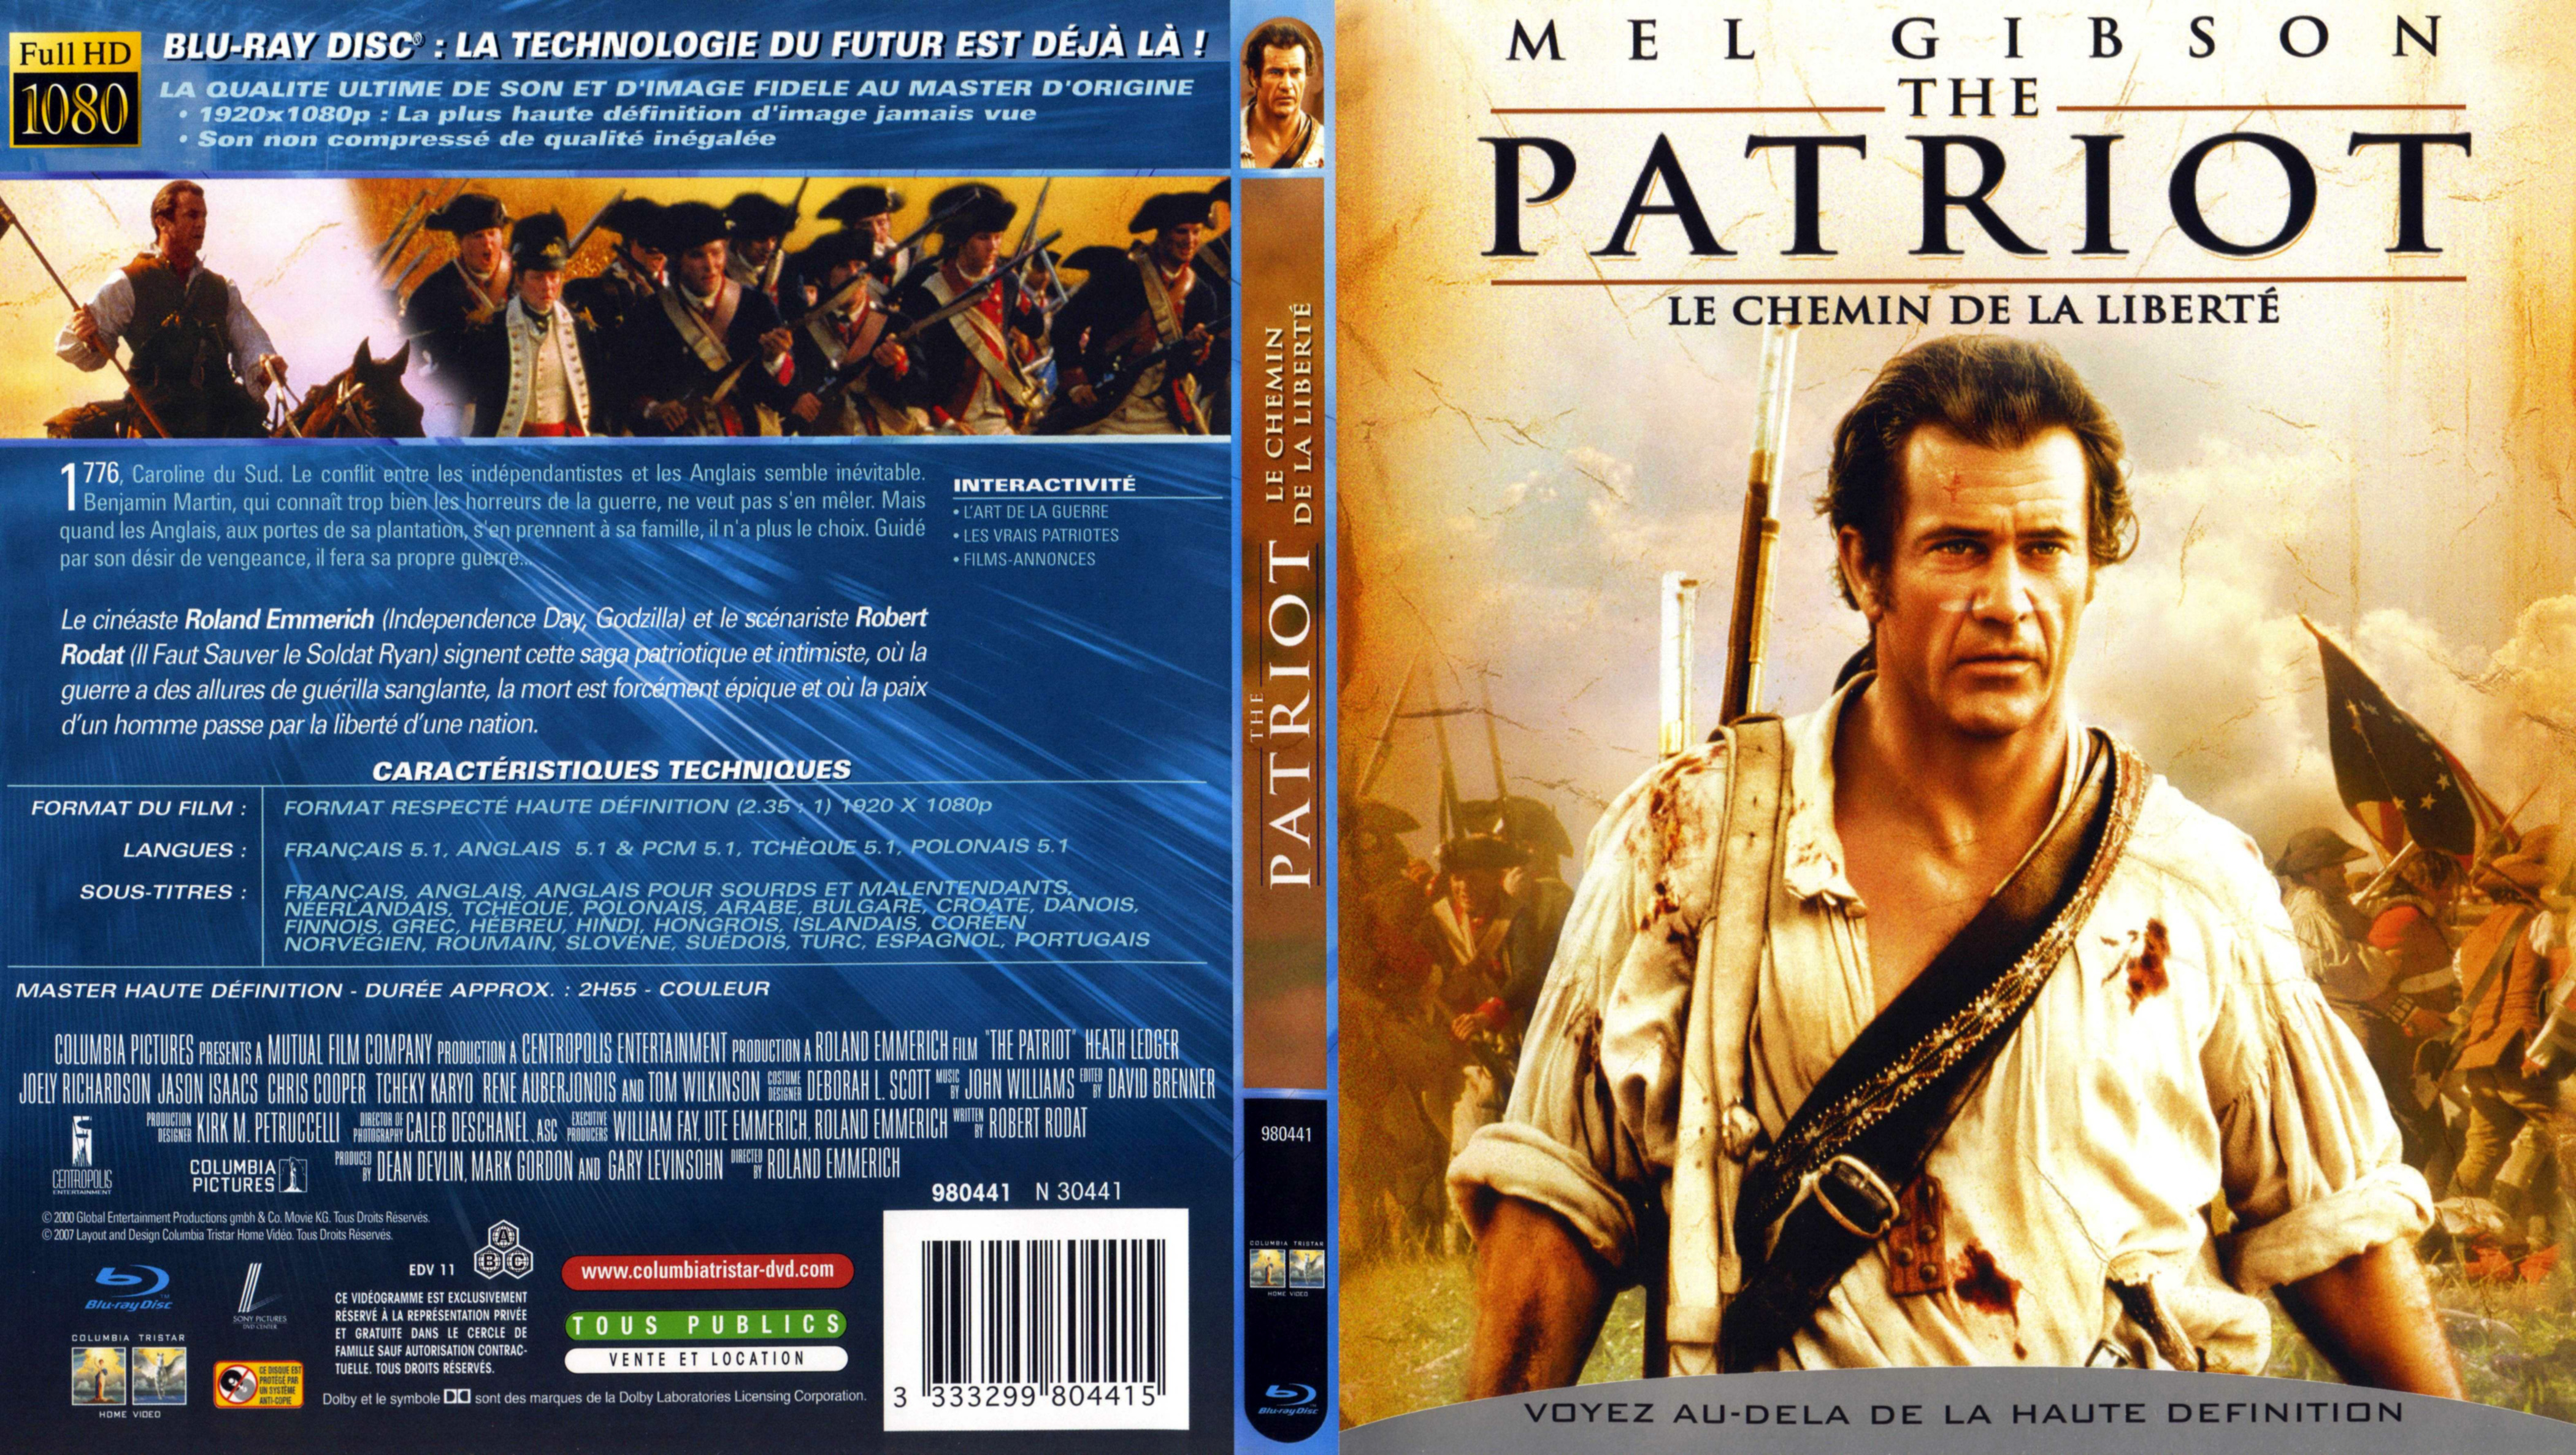 Jaquette DVD The patriot (BLU-RAY)